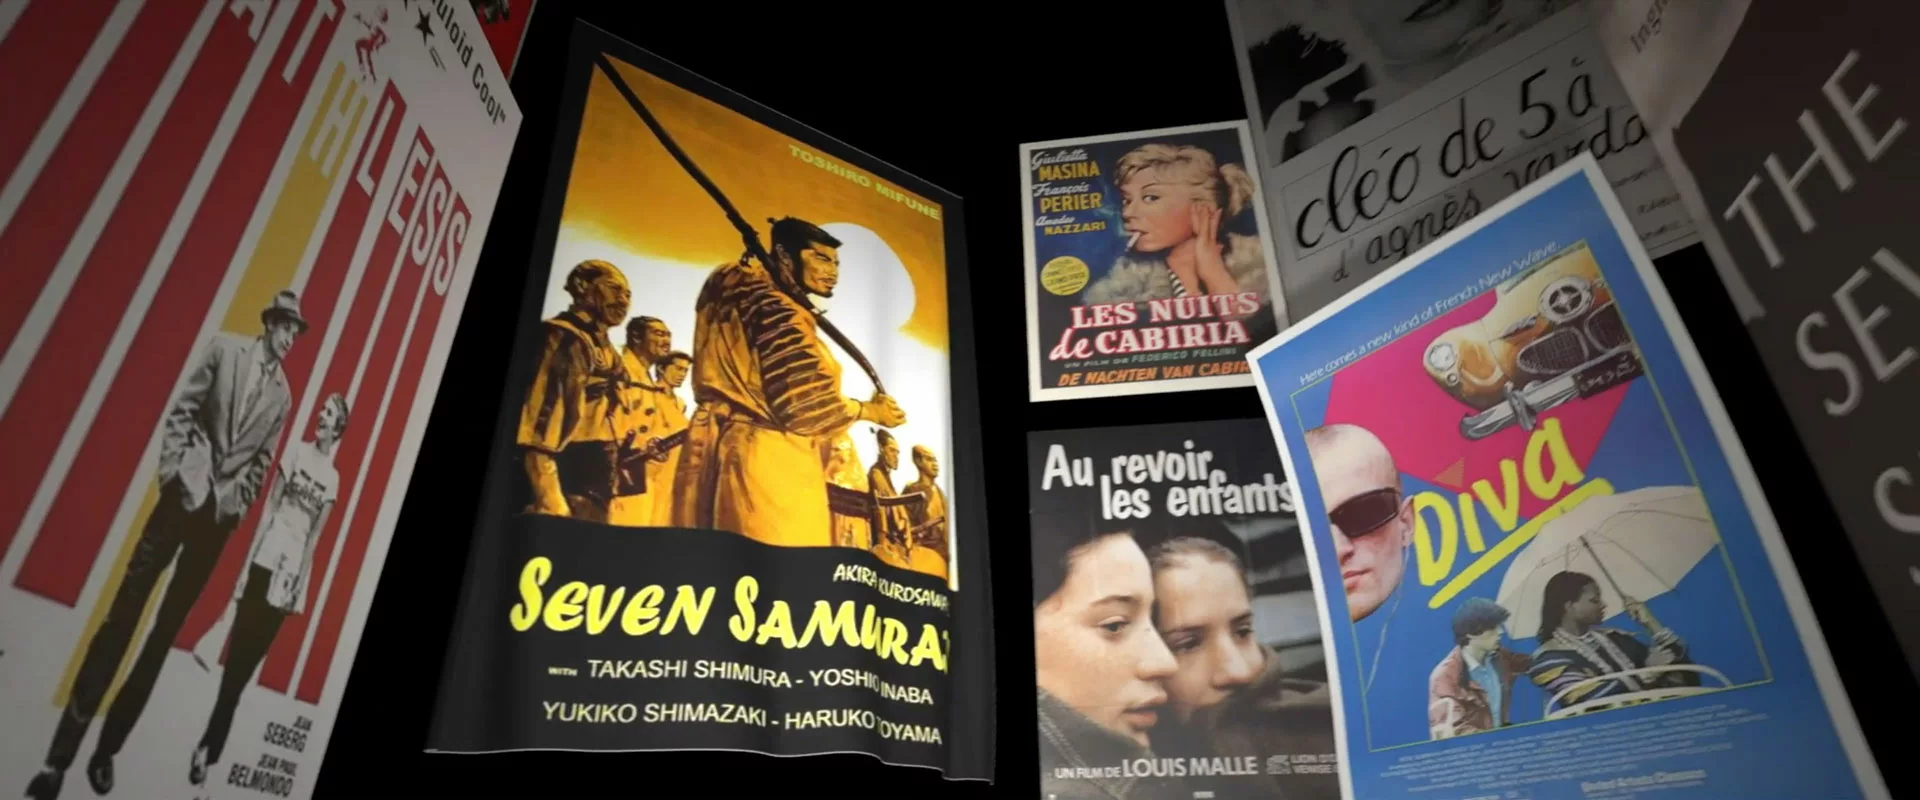 Classic film lobby cards for BREATHLESS, THE SEVEN SAMURAI, DEVO and others